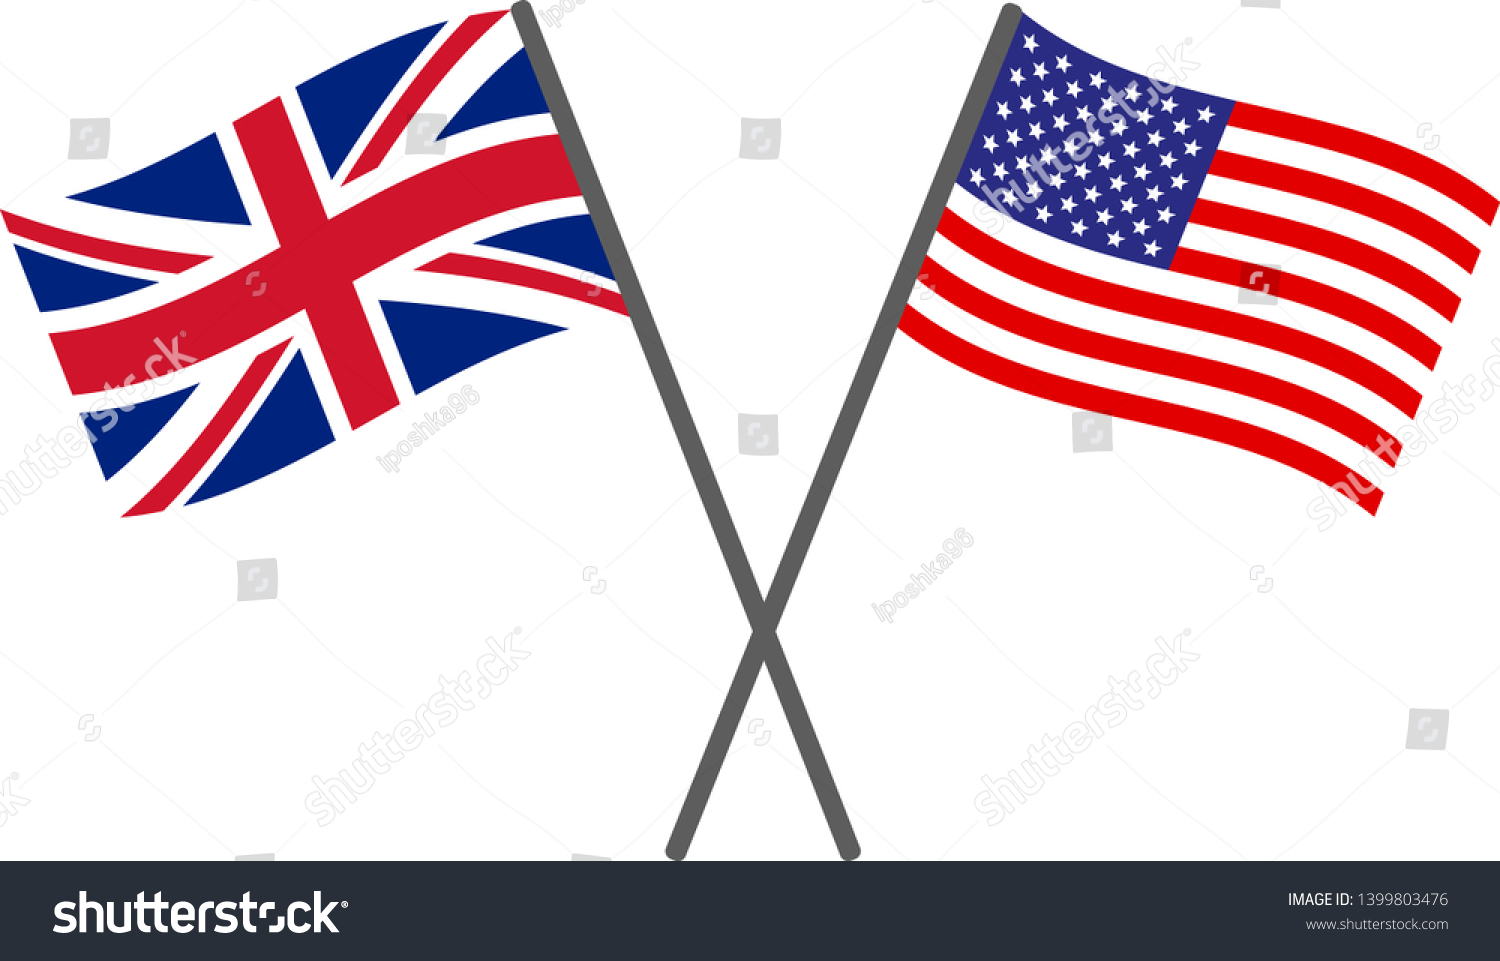 SVG of USA and UK flags vector eps10 svg